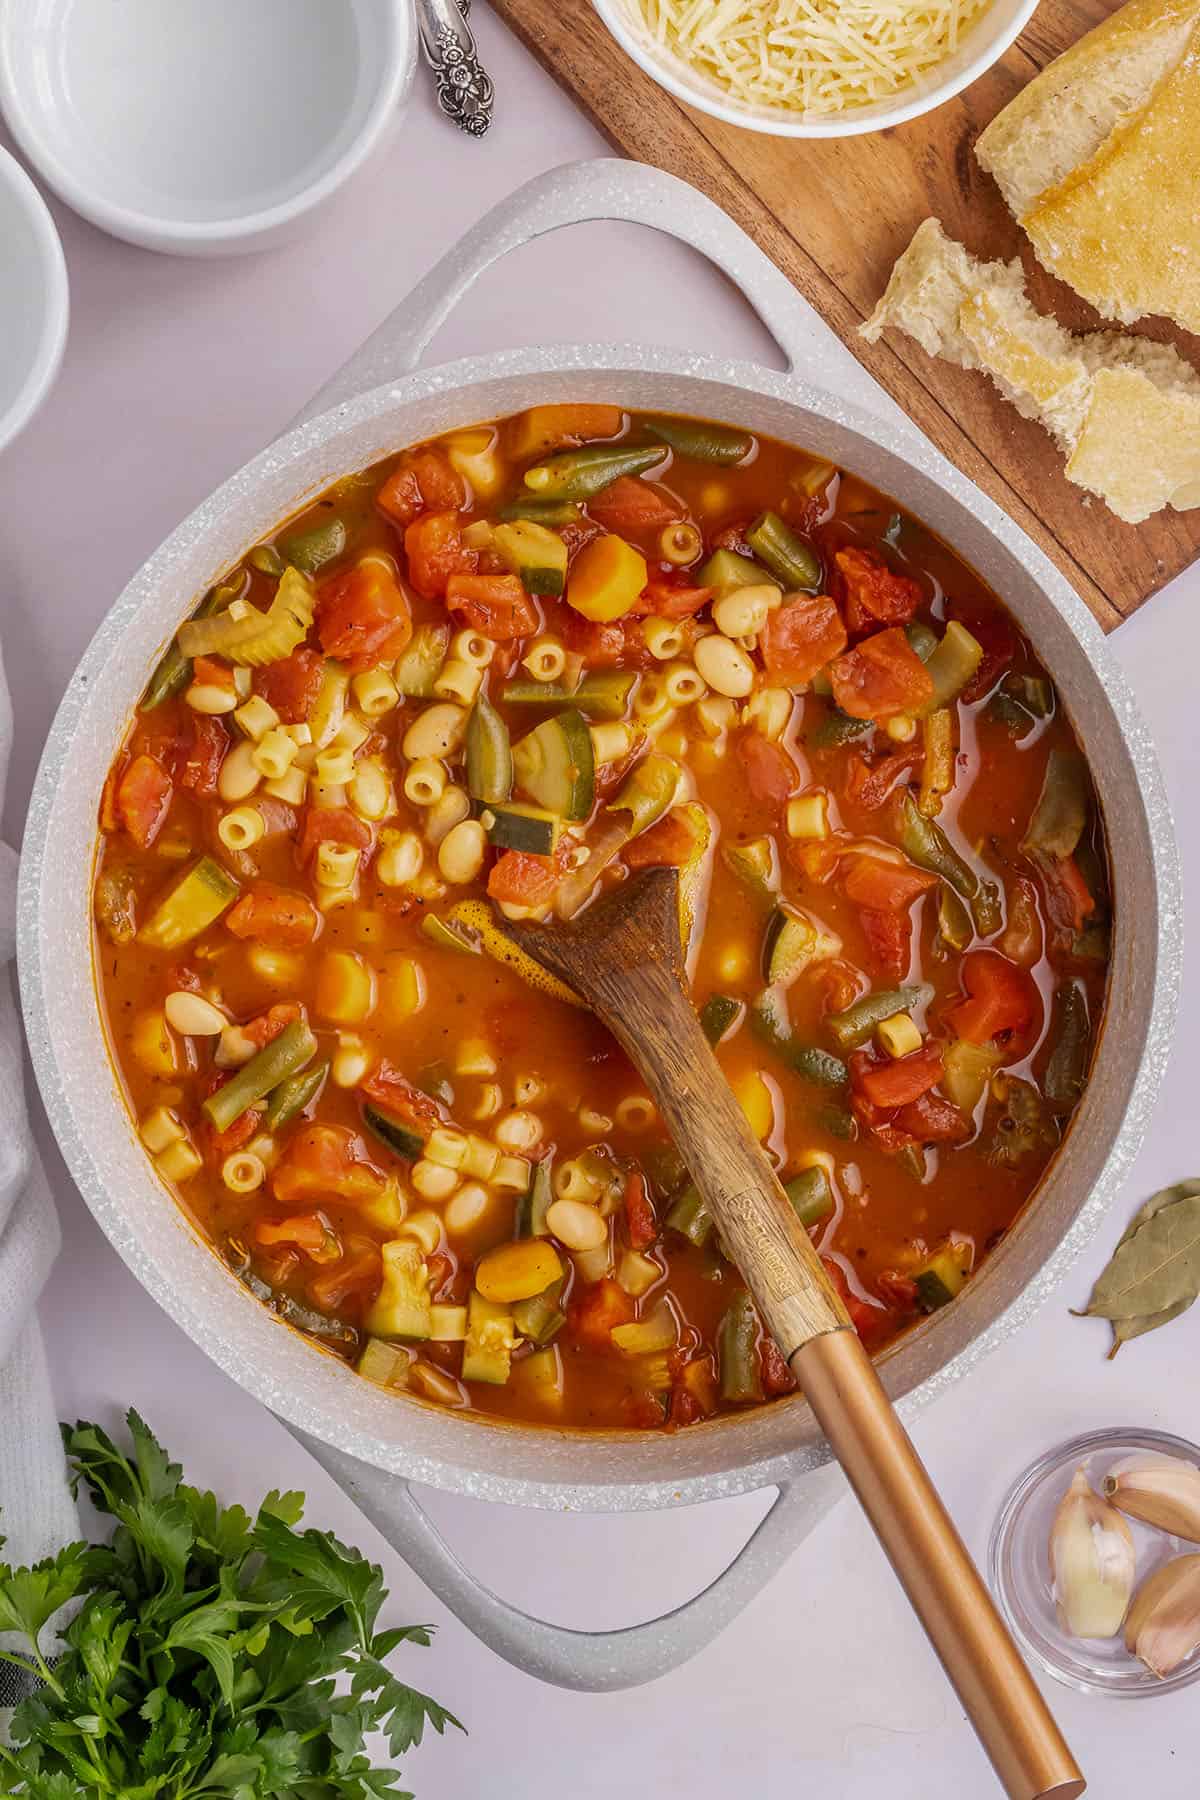 Overhead image of a pot of prepared minestrone soup with a wooden spoon in it